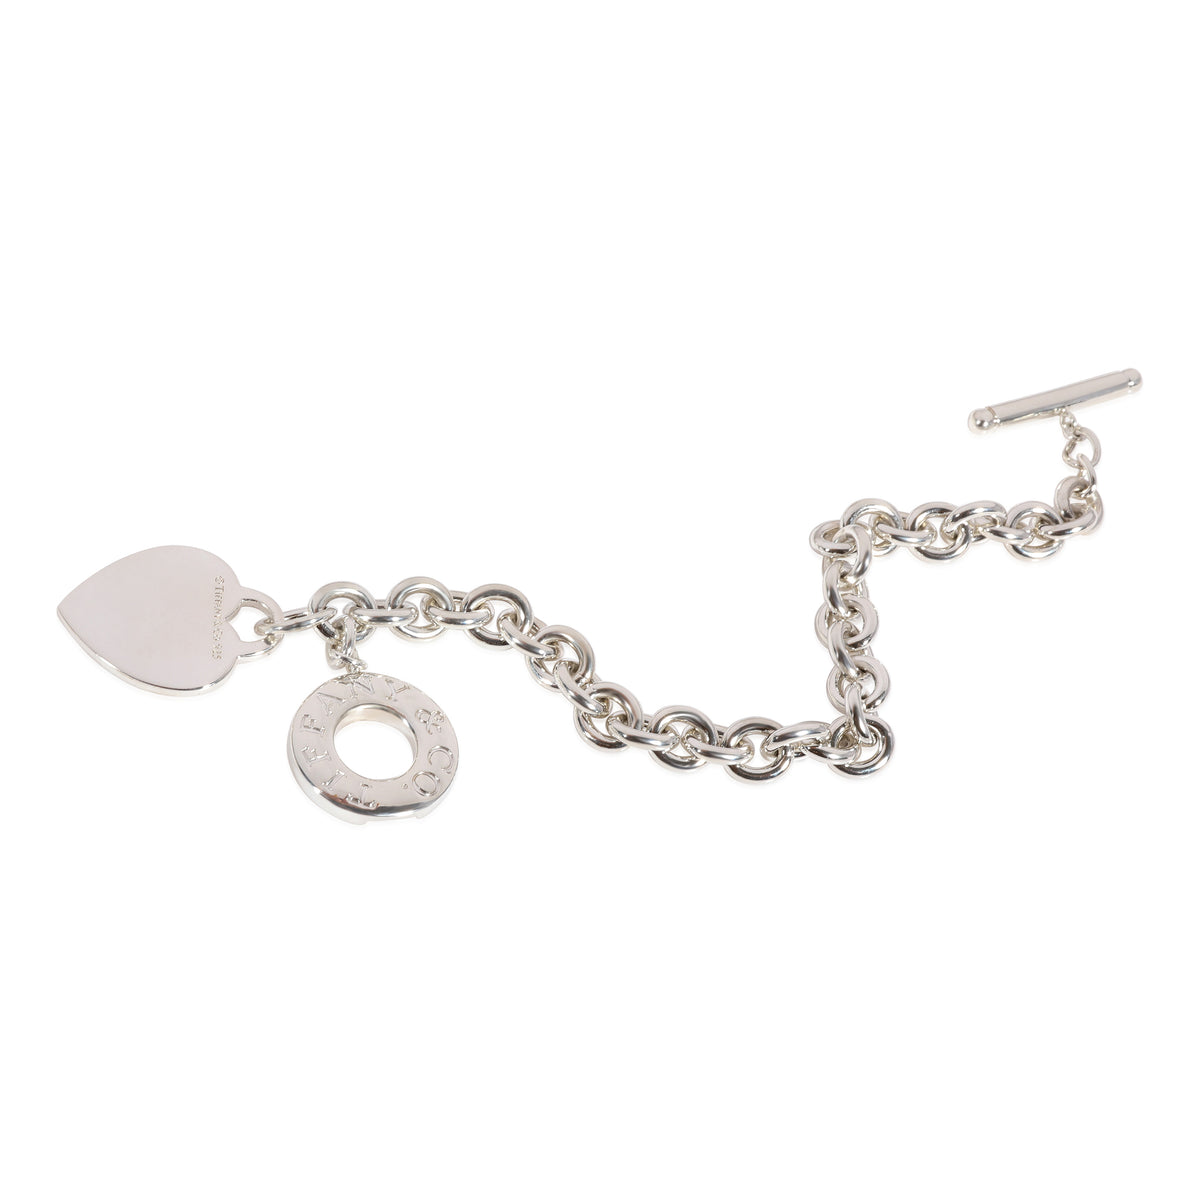 Tiffany & Co. Heart Tag Bracelet With Toggle Clasp in Sterling Silver